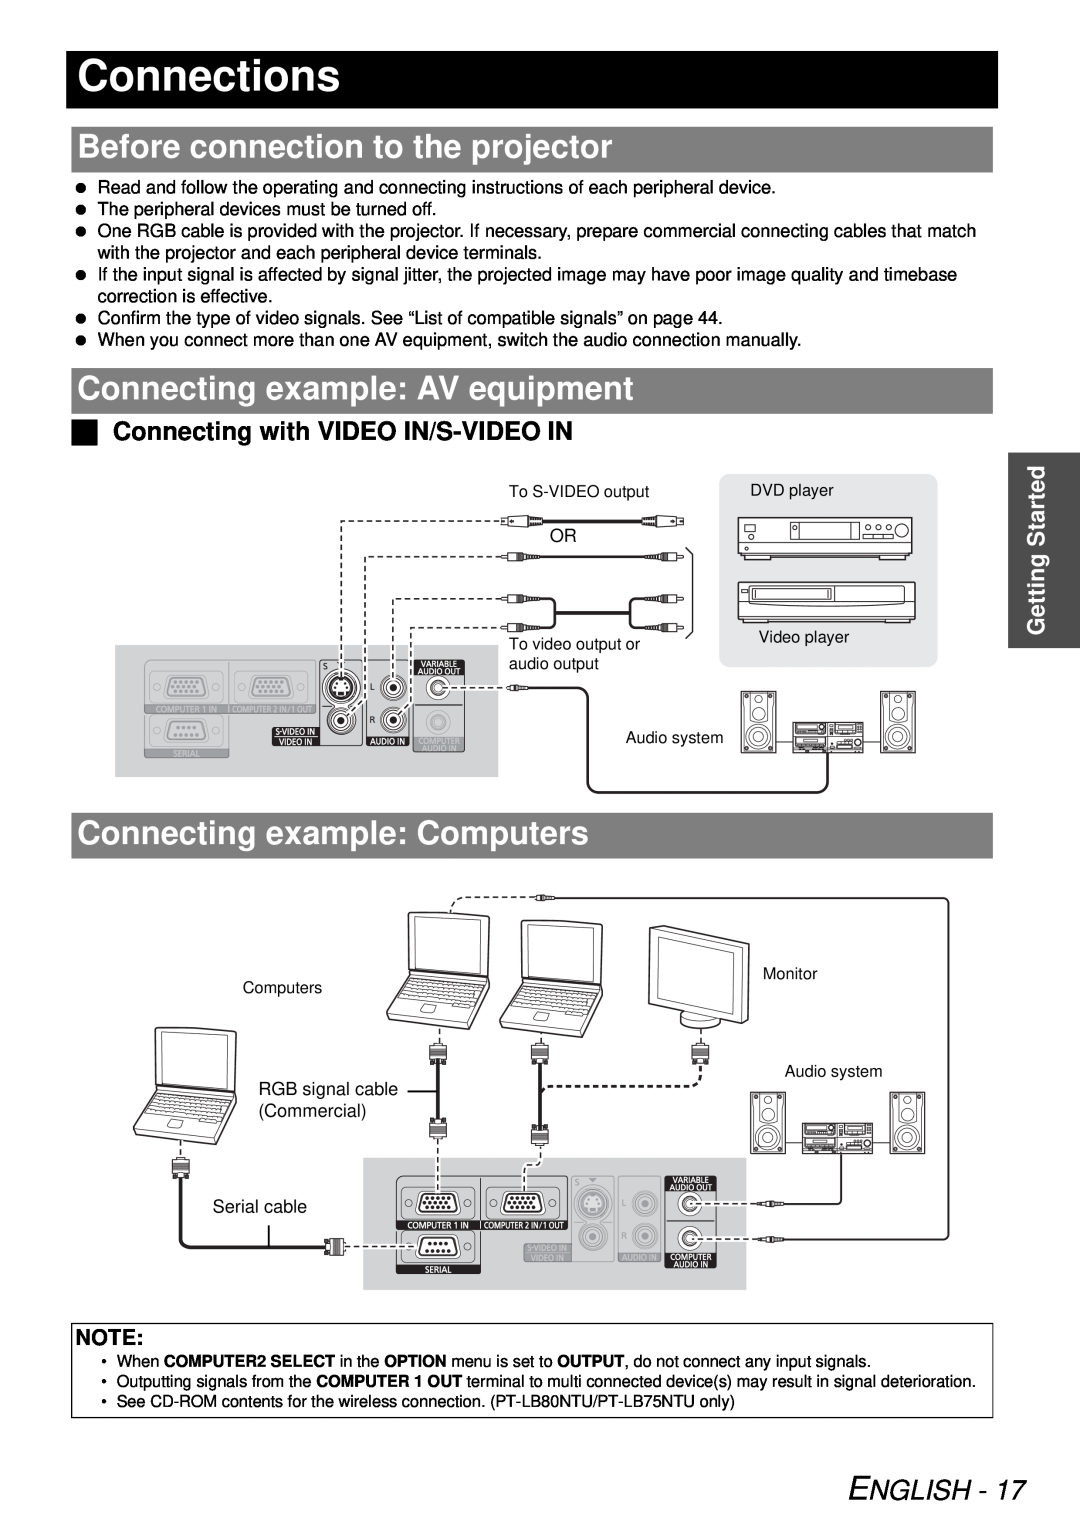 Panasonic PT-LB78U manual Connections, Before connection to the projector, Connecting example AV equipment, English 